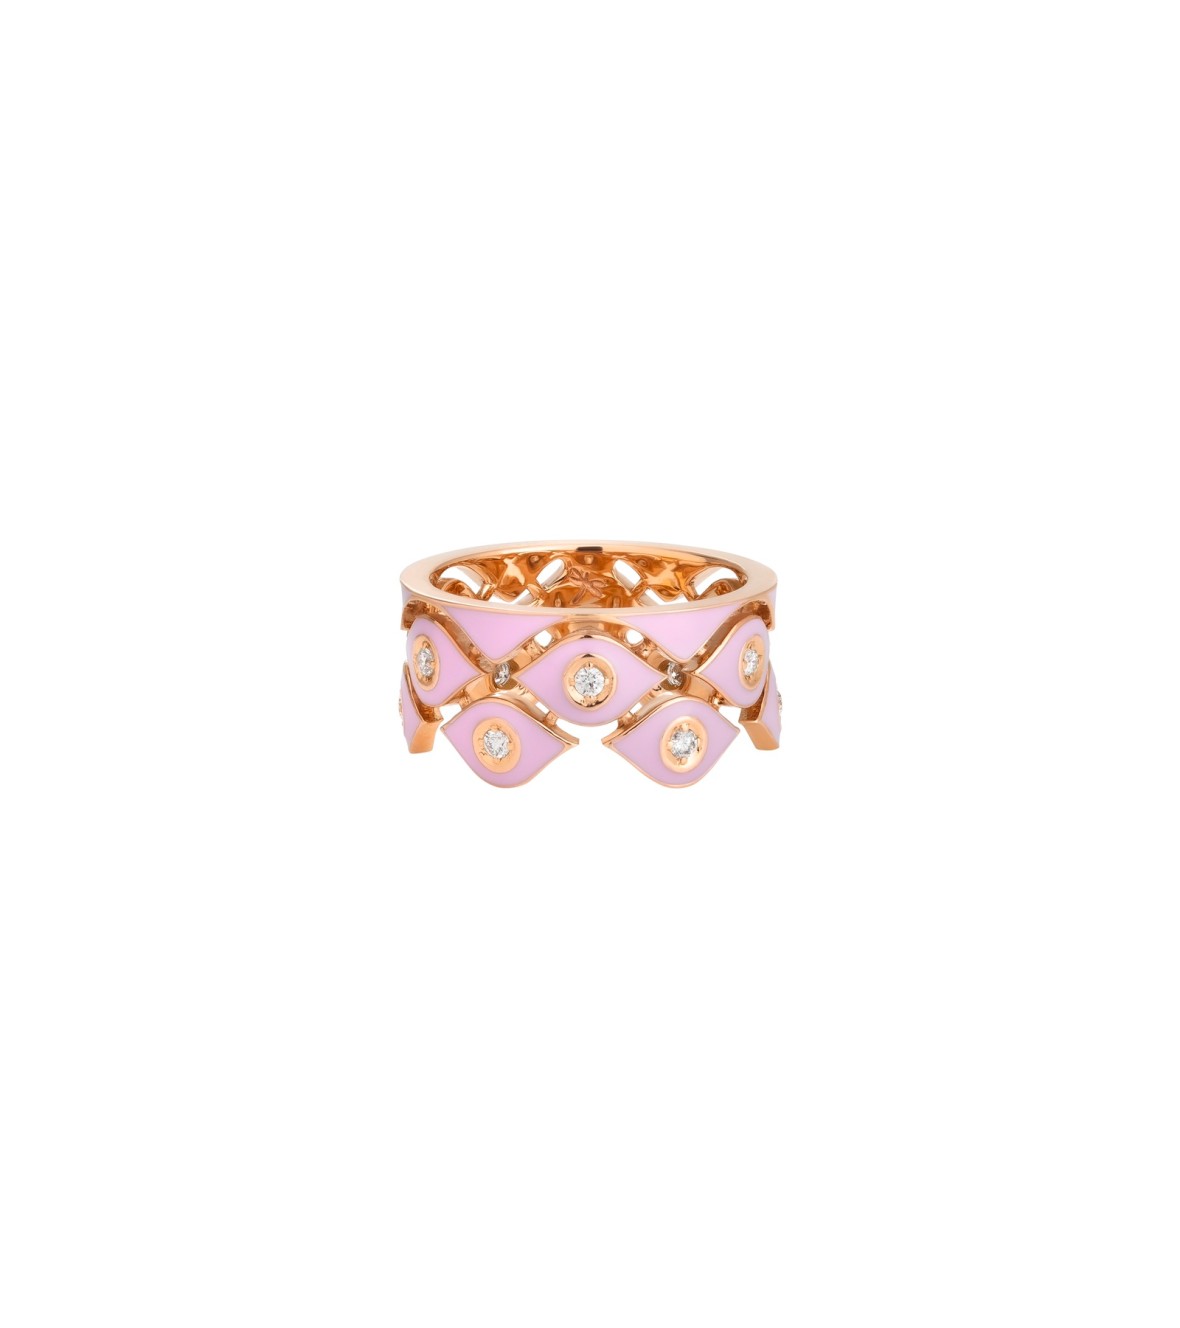 Yellow Gold Ring with Diamonds and Pink Enamel Casato